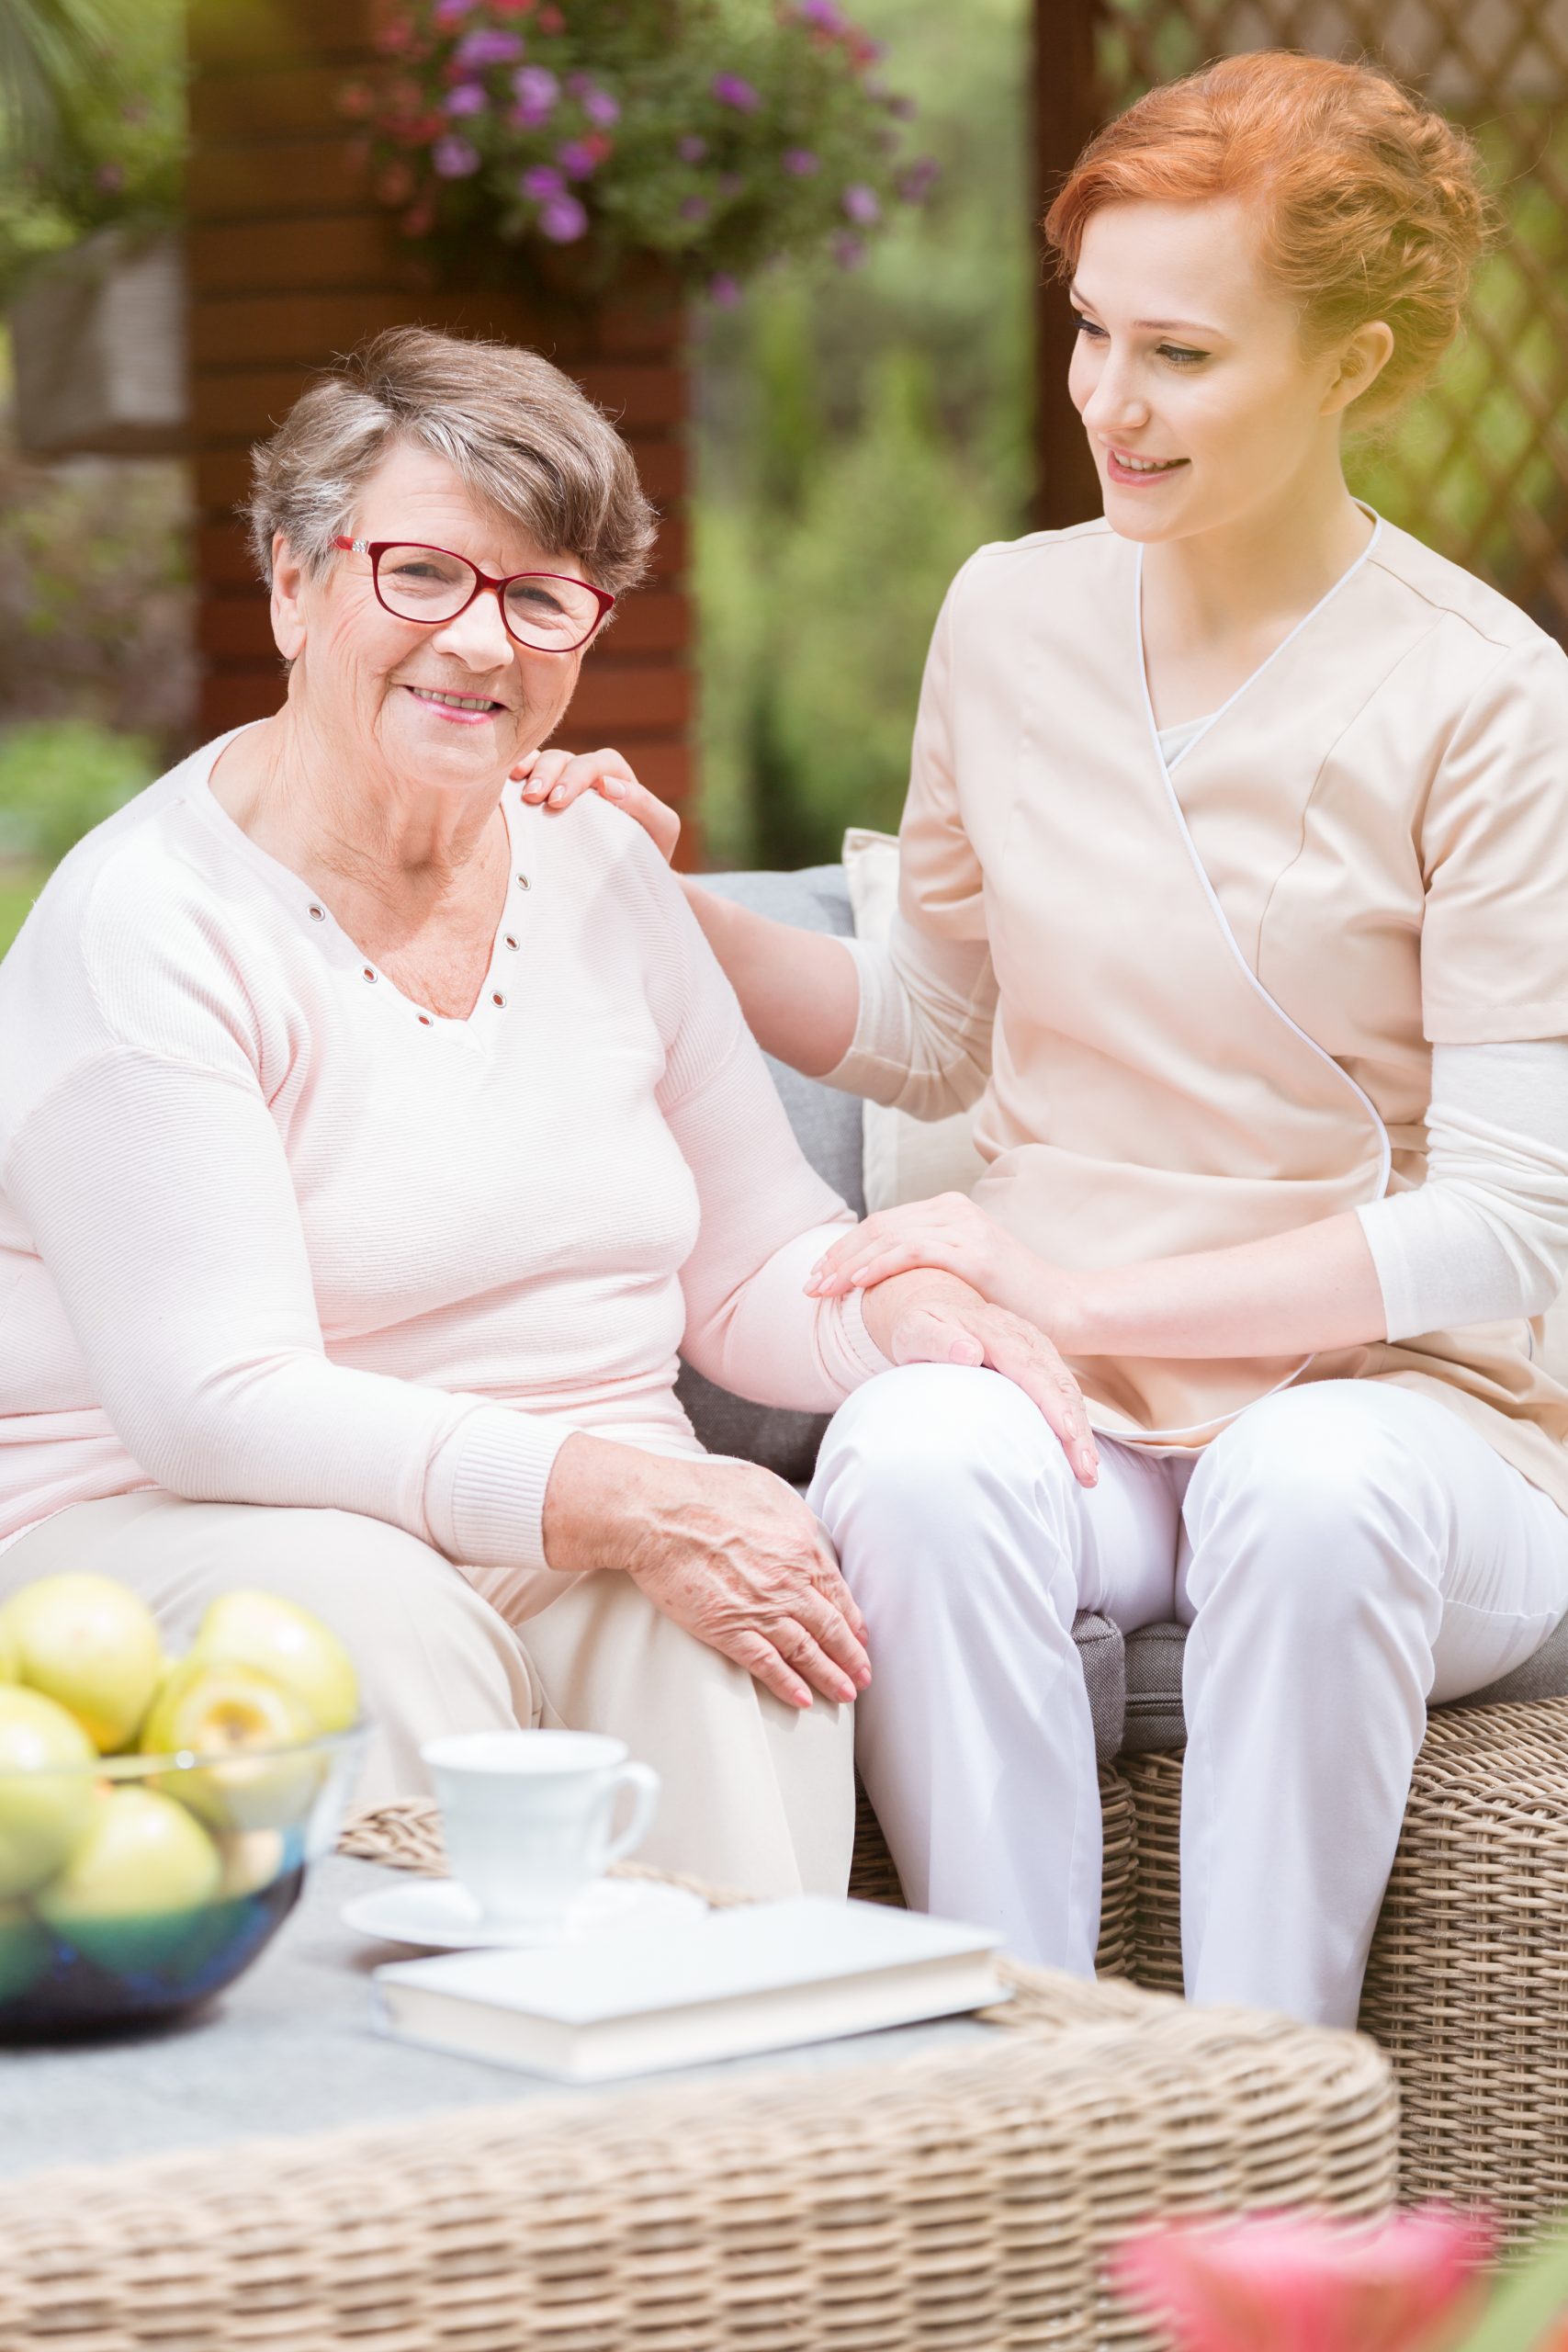 Tender professional caregiver in uniform putting her hand on a shoulder of an elderly woman during snack time on a patio of a senior home. Blurred background.